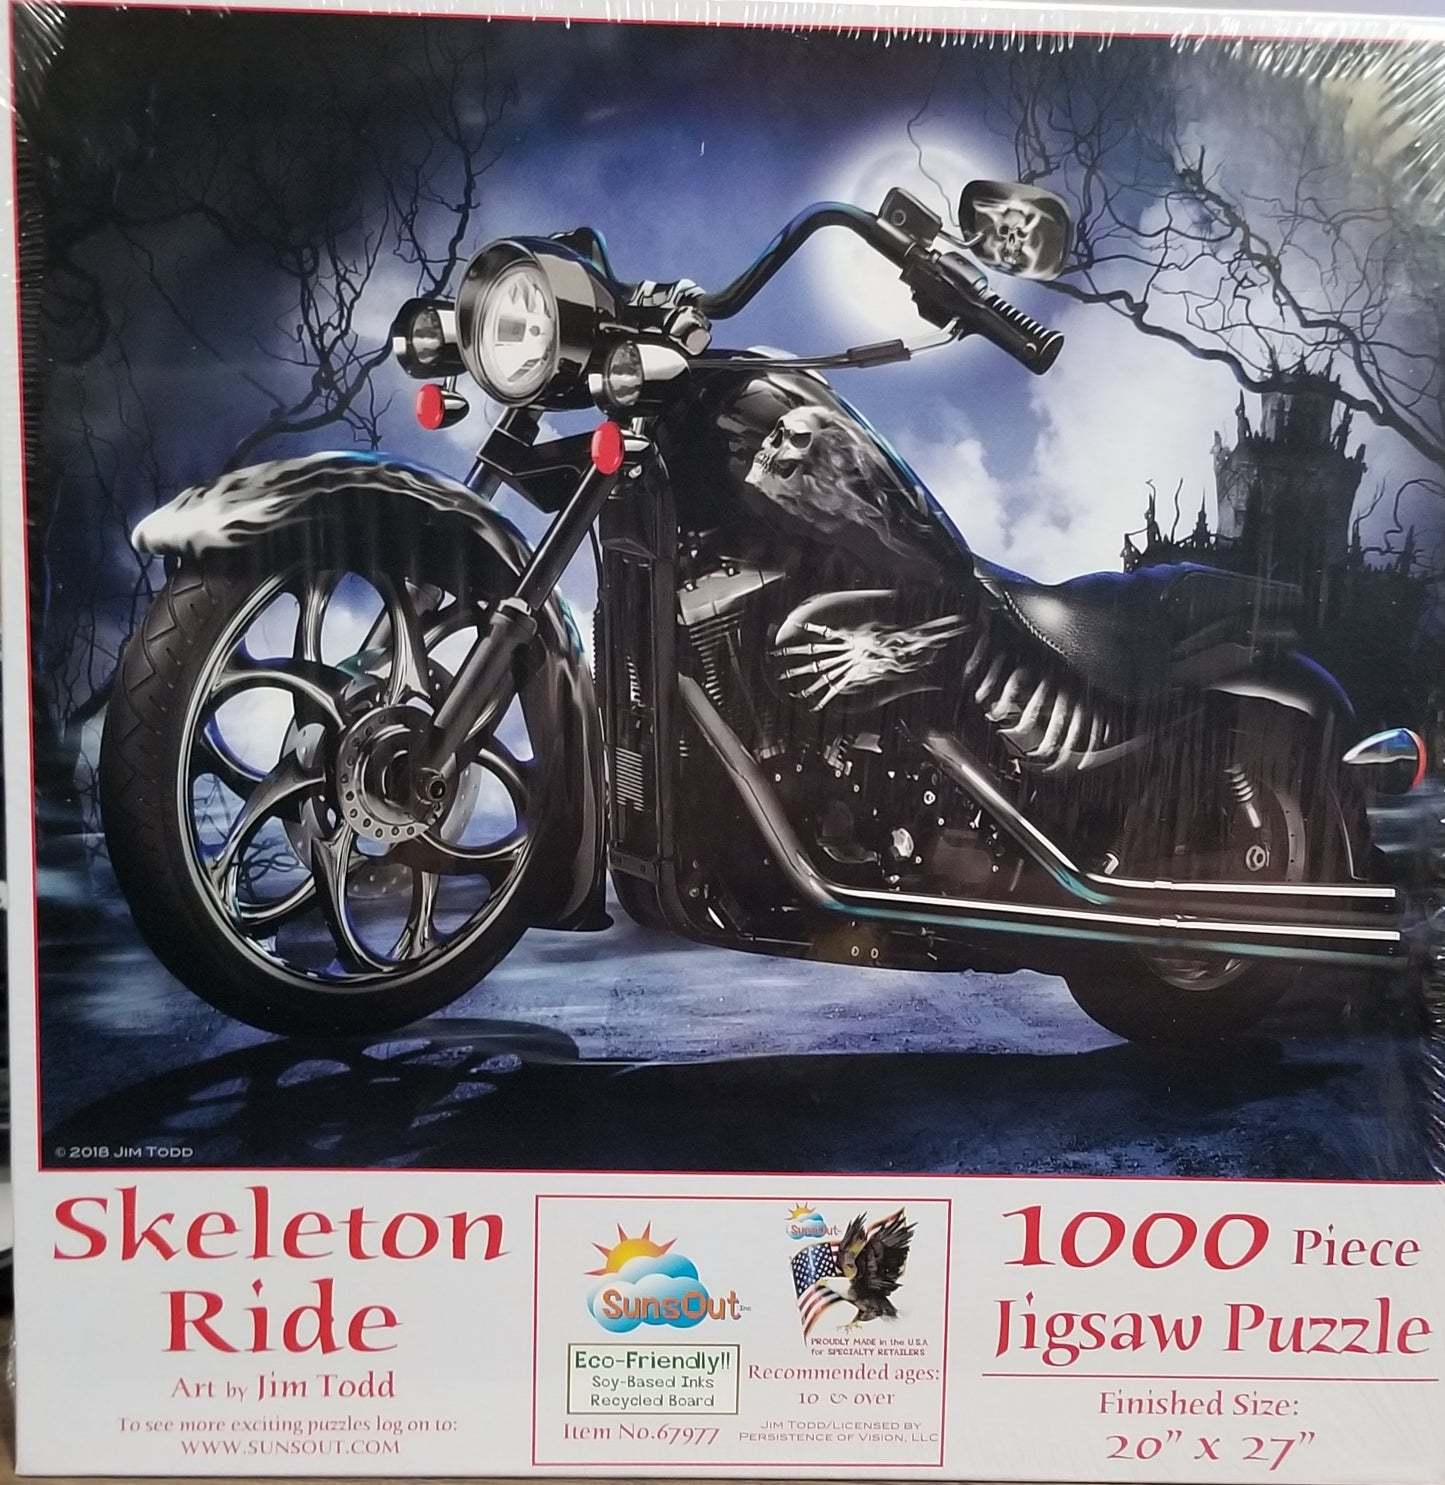 Skeleton Ride by Jim Todd, 1000 Piece Puzzle